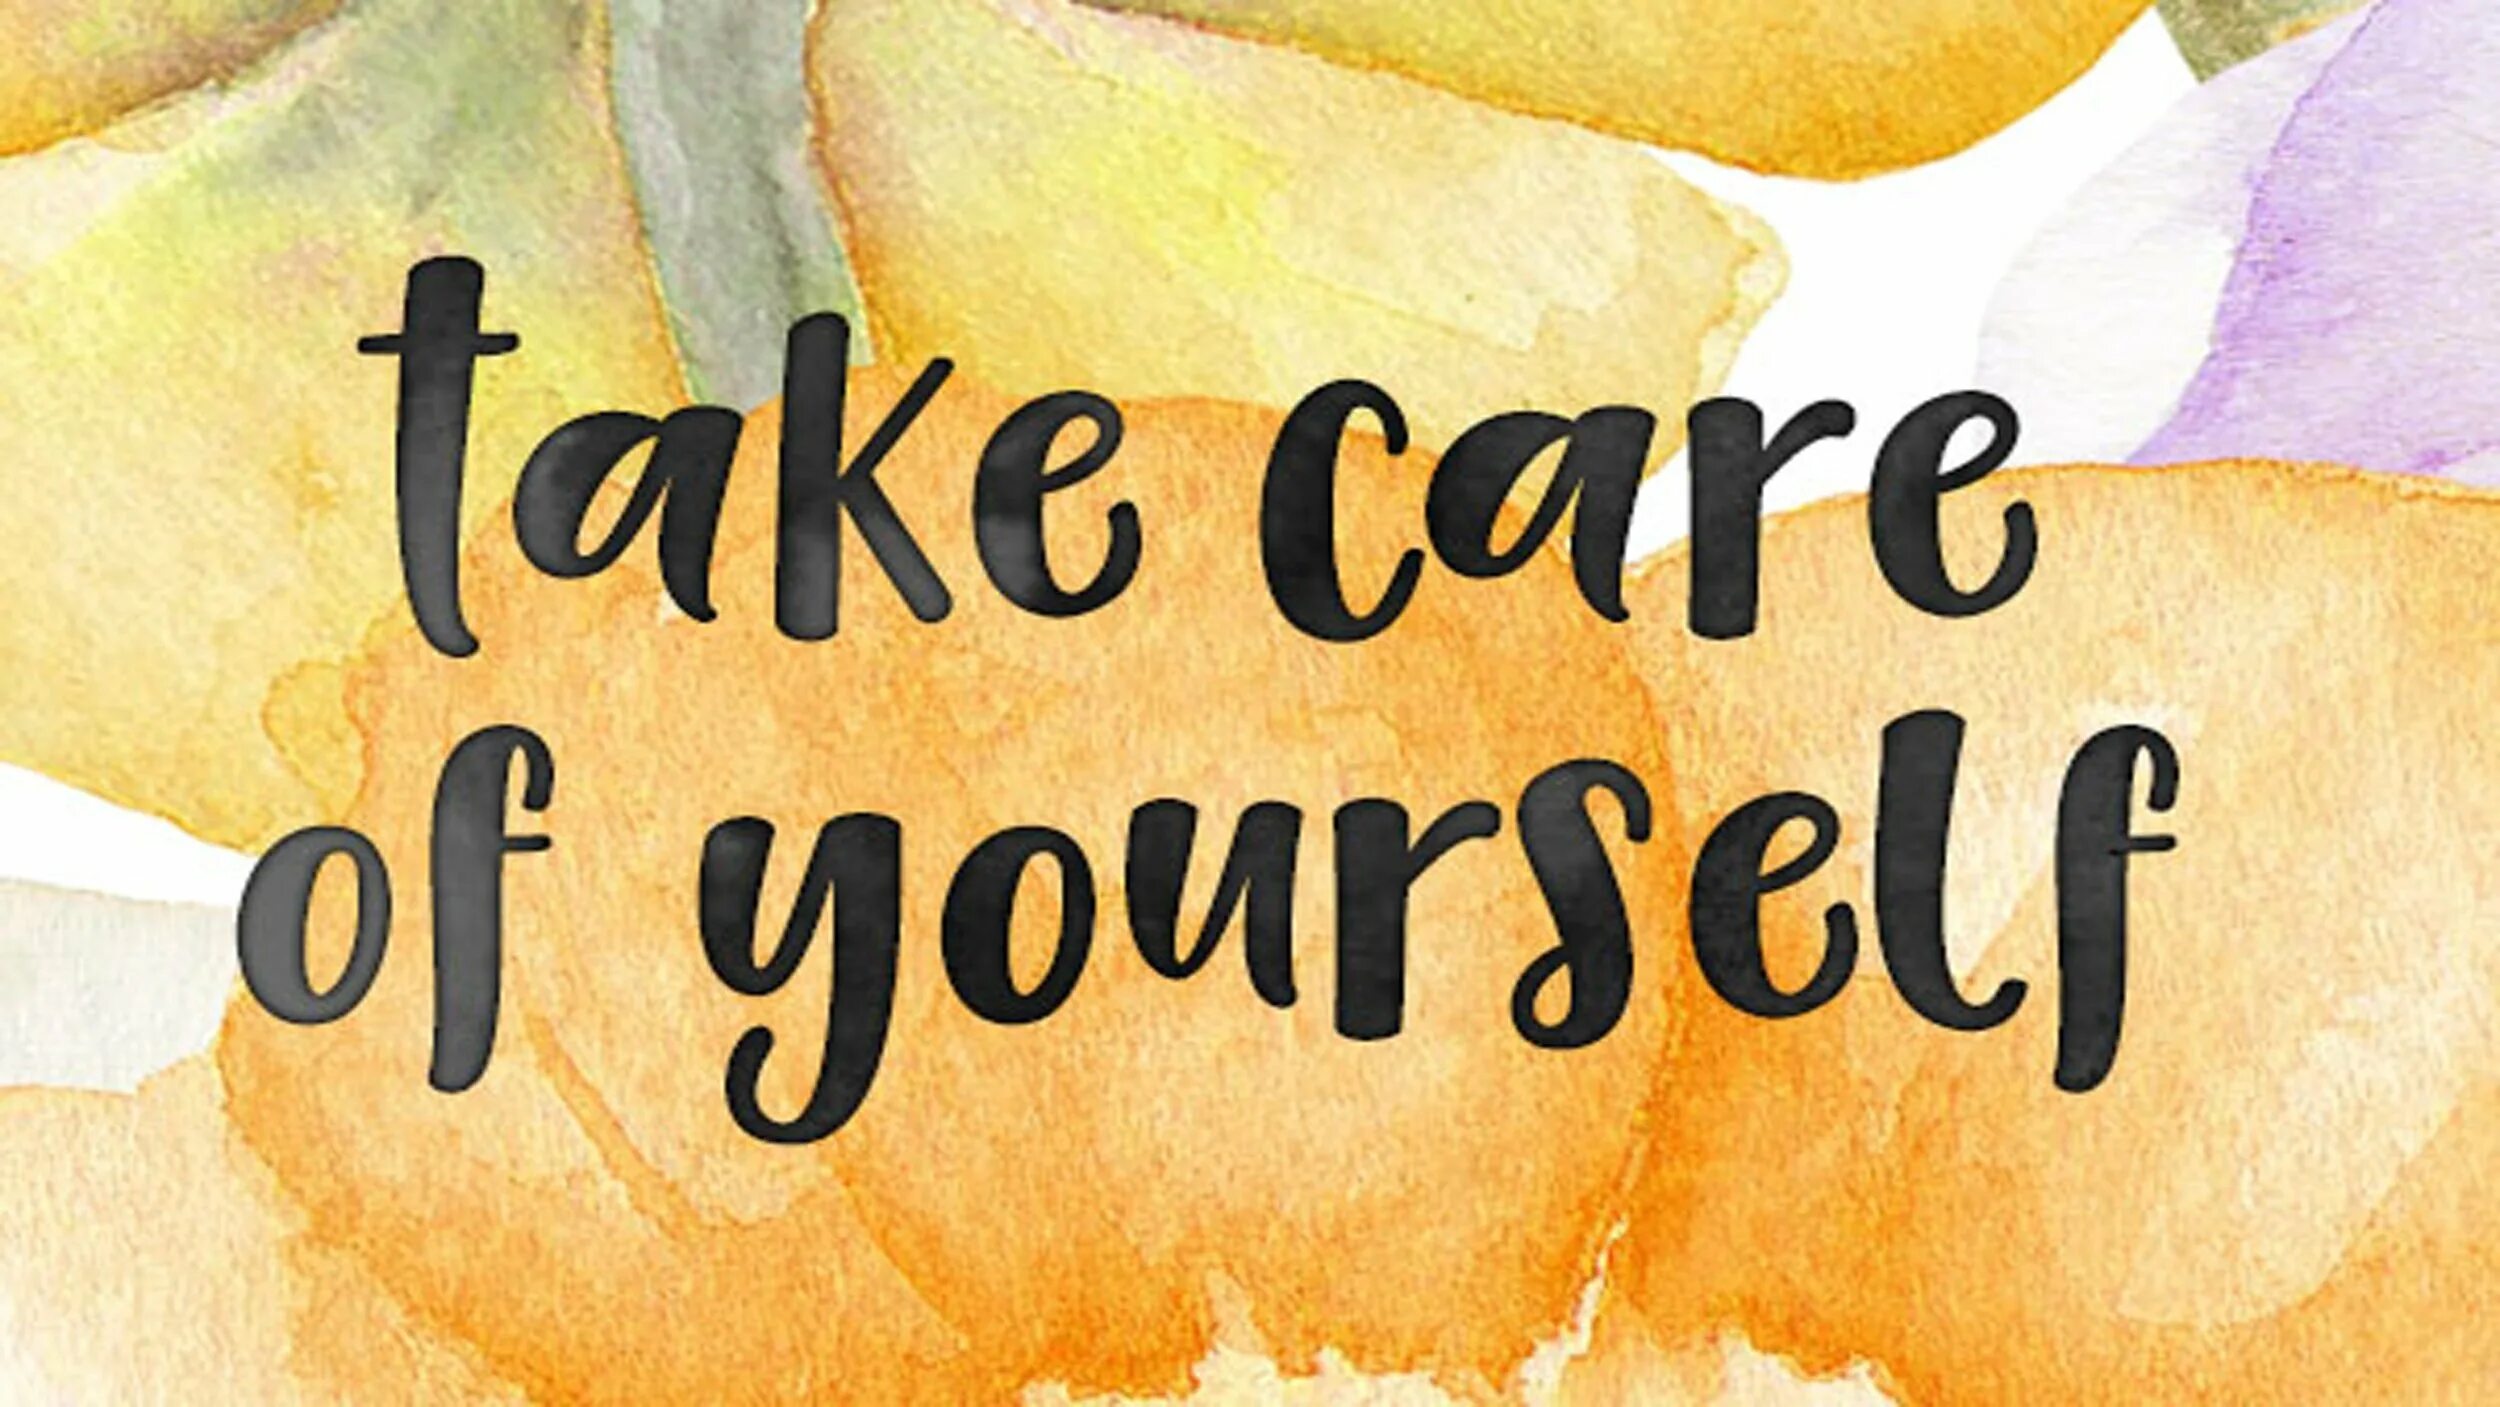 Take good care of my. Take Care of yourself. Take Care about yourself. Take Care of yourself картинки. Care for yourself рисунки.